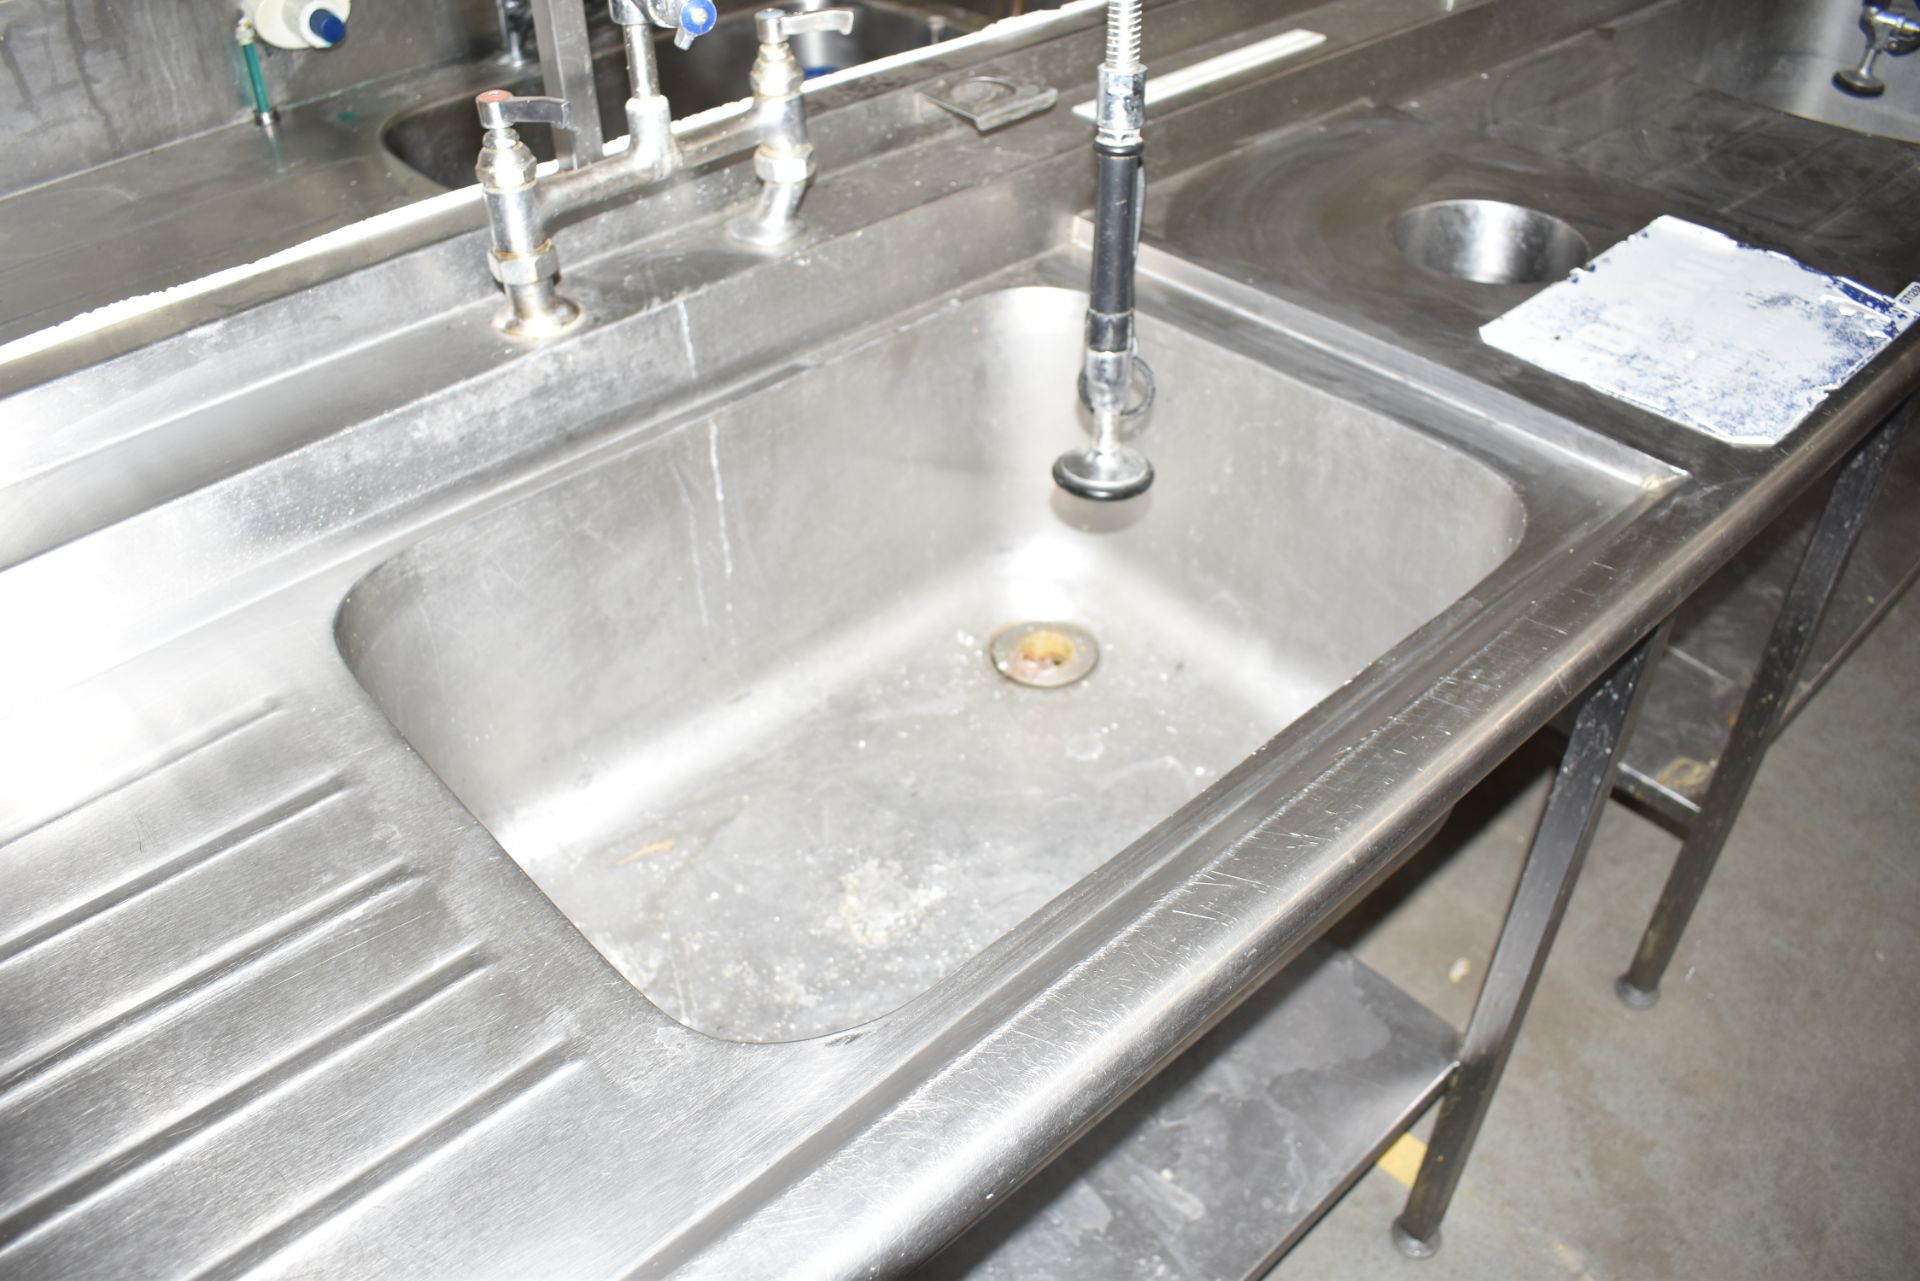 1 x Stainless Steel Commercial Wash Basin Unit With Twin Sink Bowl and Drainers, Mixer Taps, Spray H - Image 12 of 12